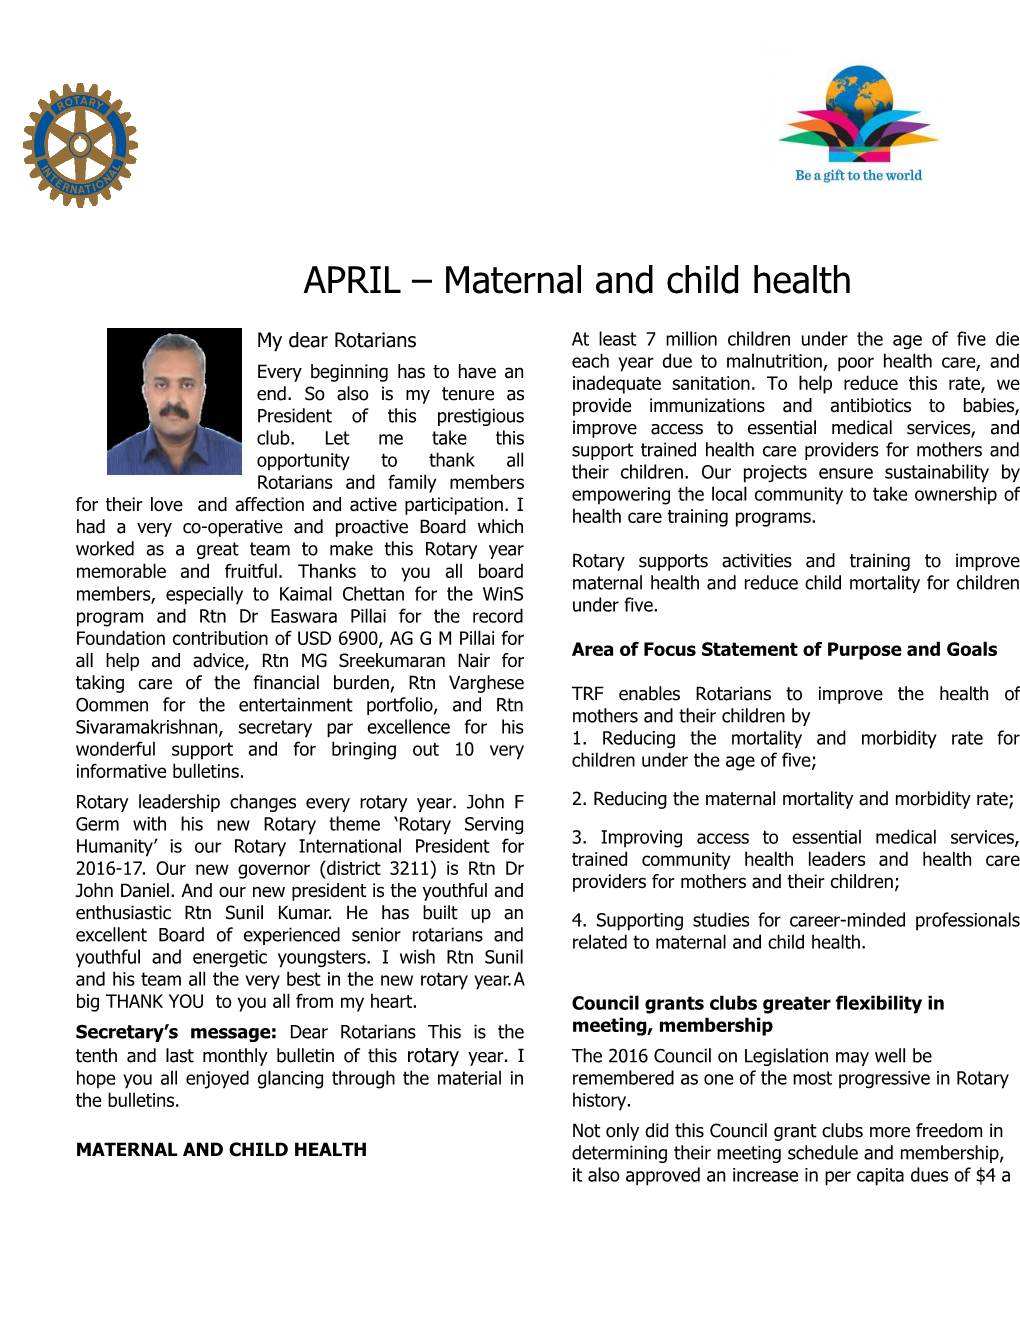 APRIL Maternal and Child Health